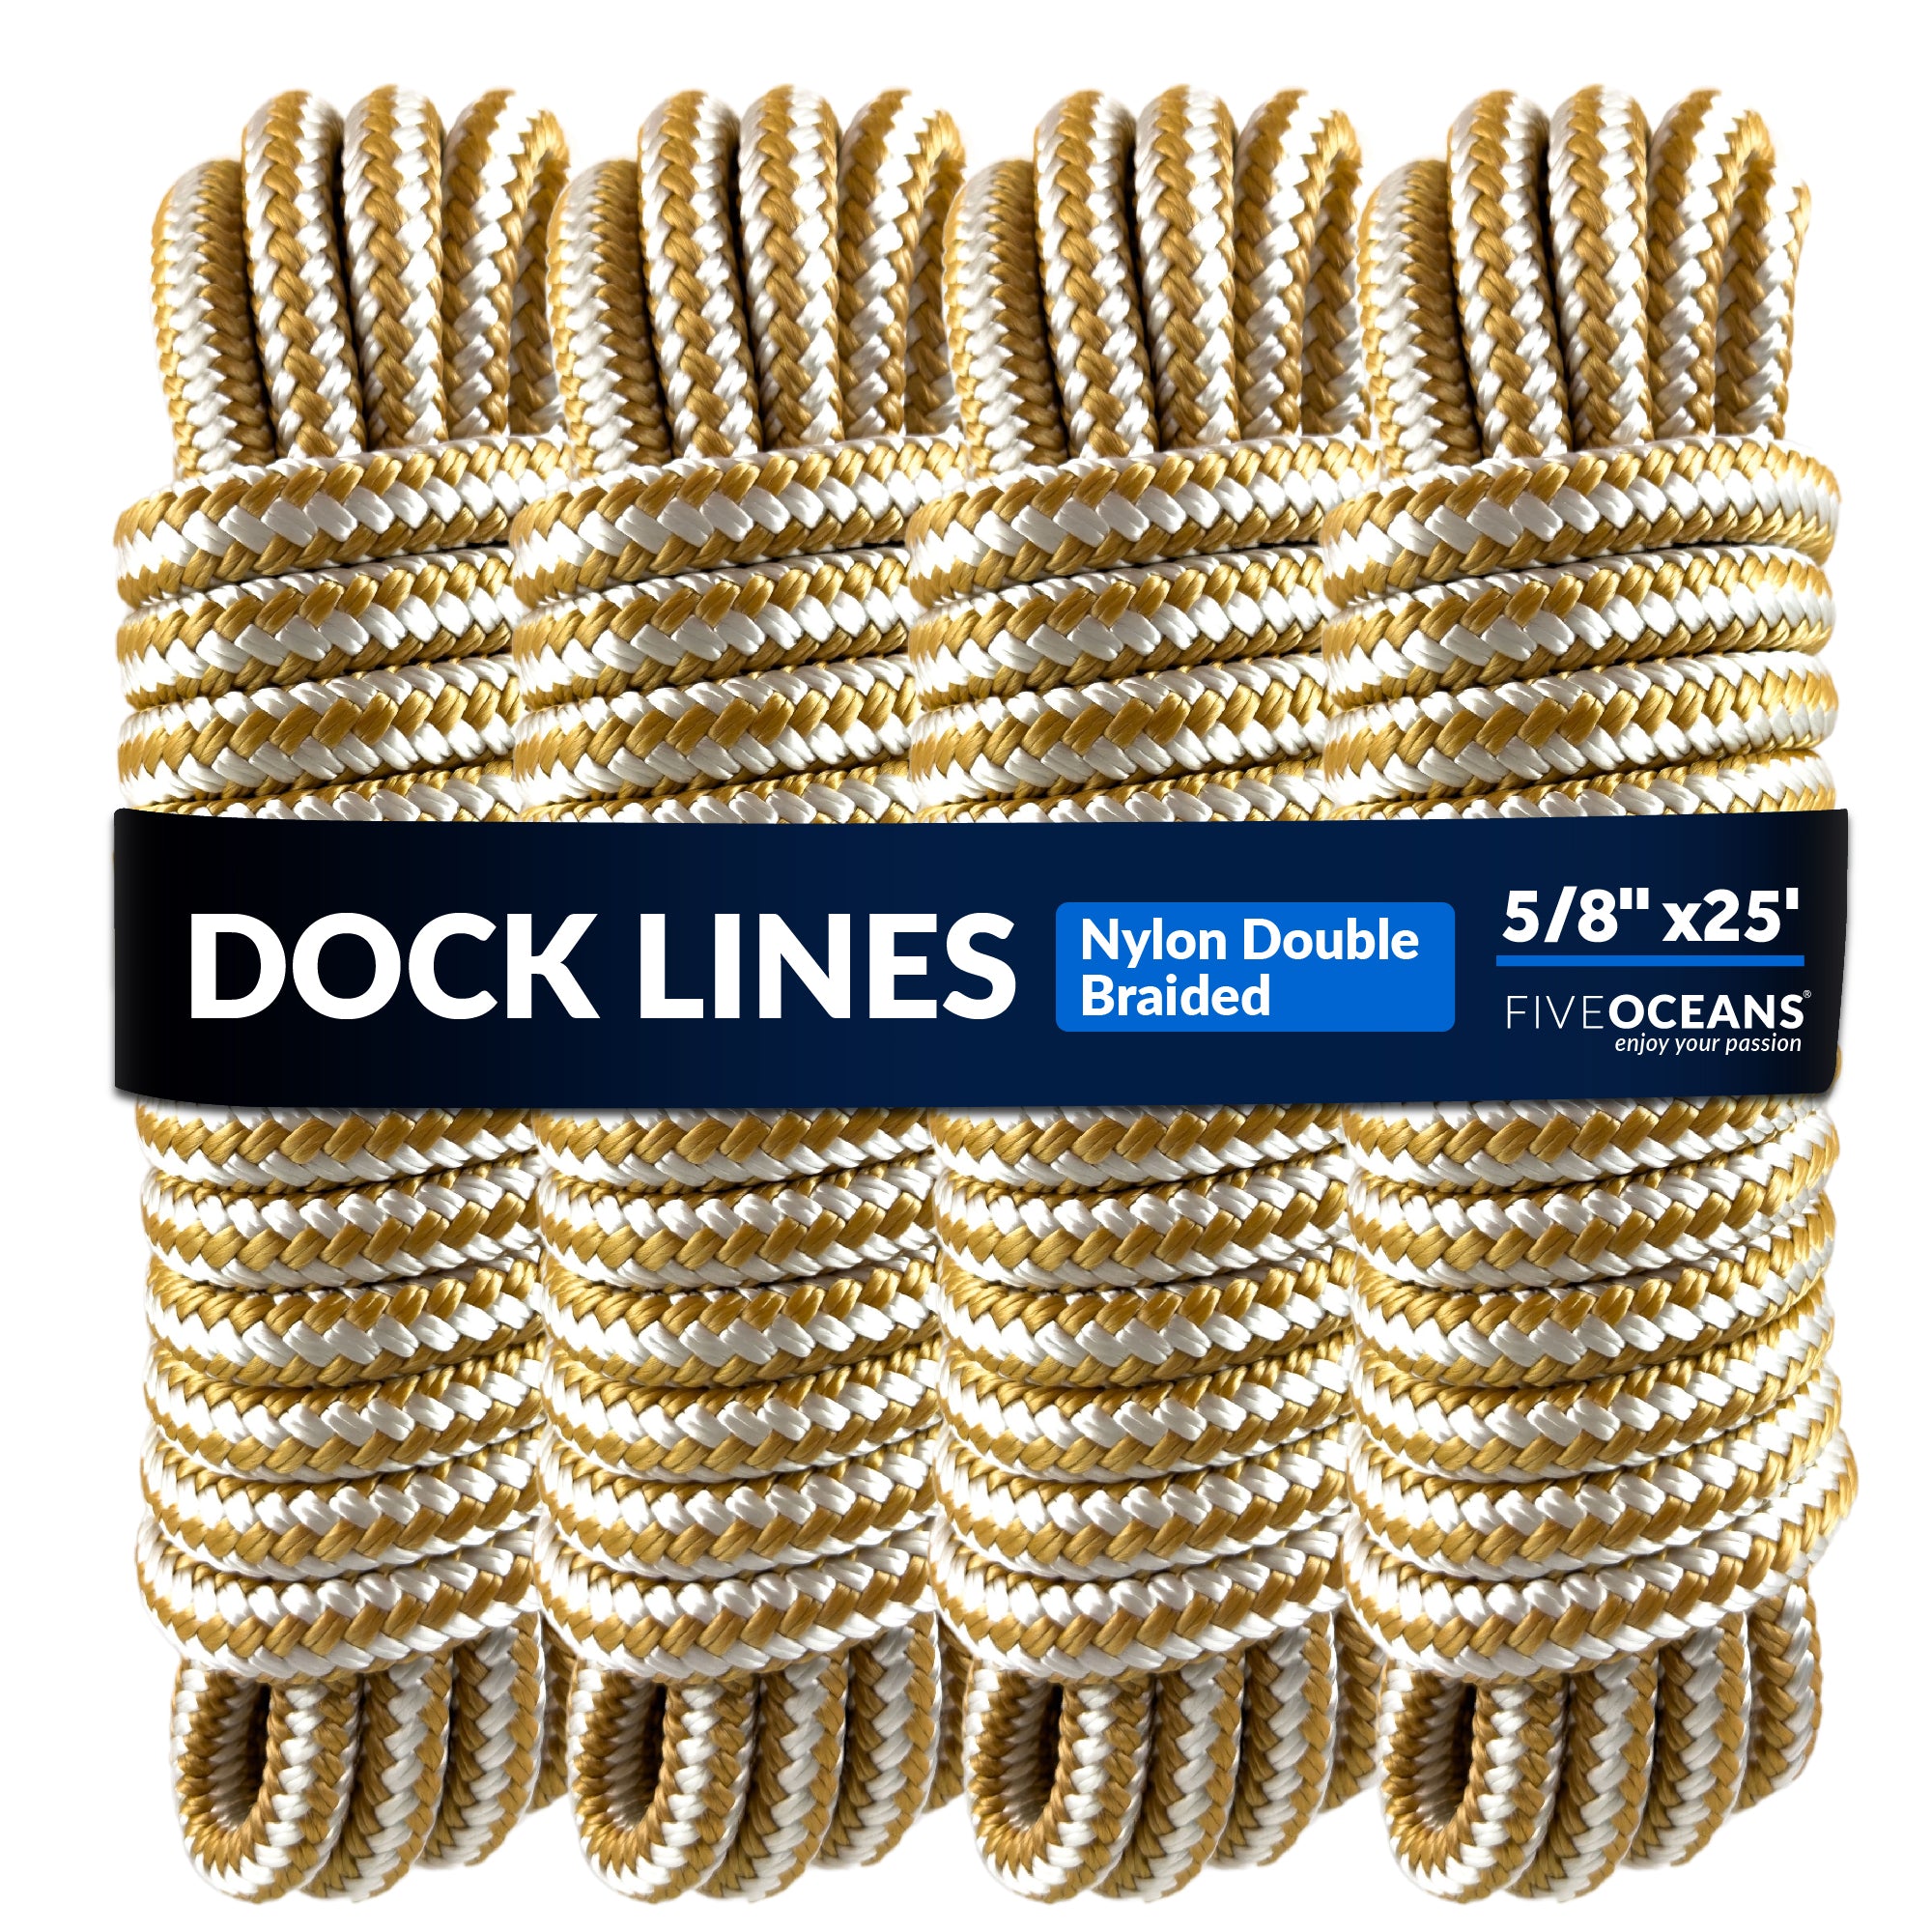 Dock Lines, 5/8" x 25', Gold/White Nylon Double Braided with 16" Eyelet, 4-pack - FO4276-M4